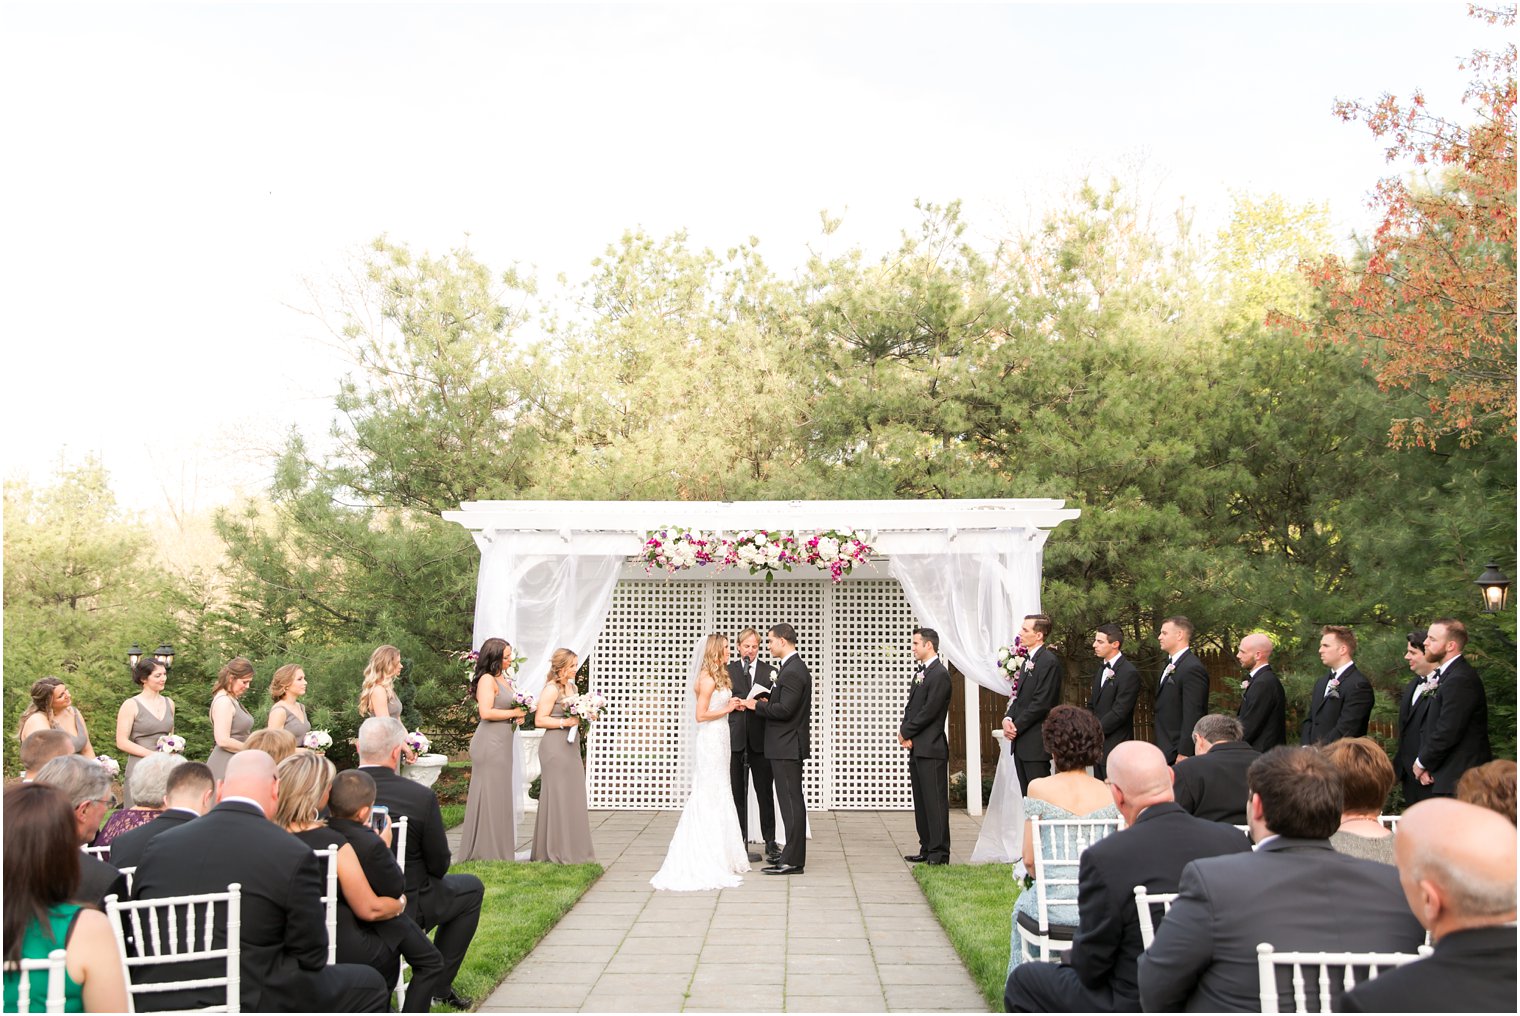 Exchanging vows on wedding day | Photos by Idalia Photography